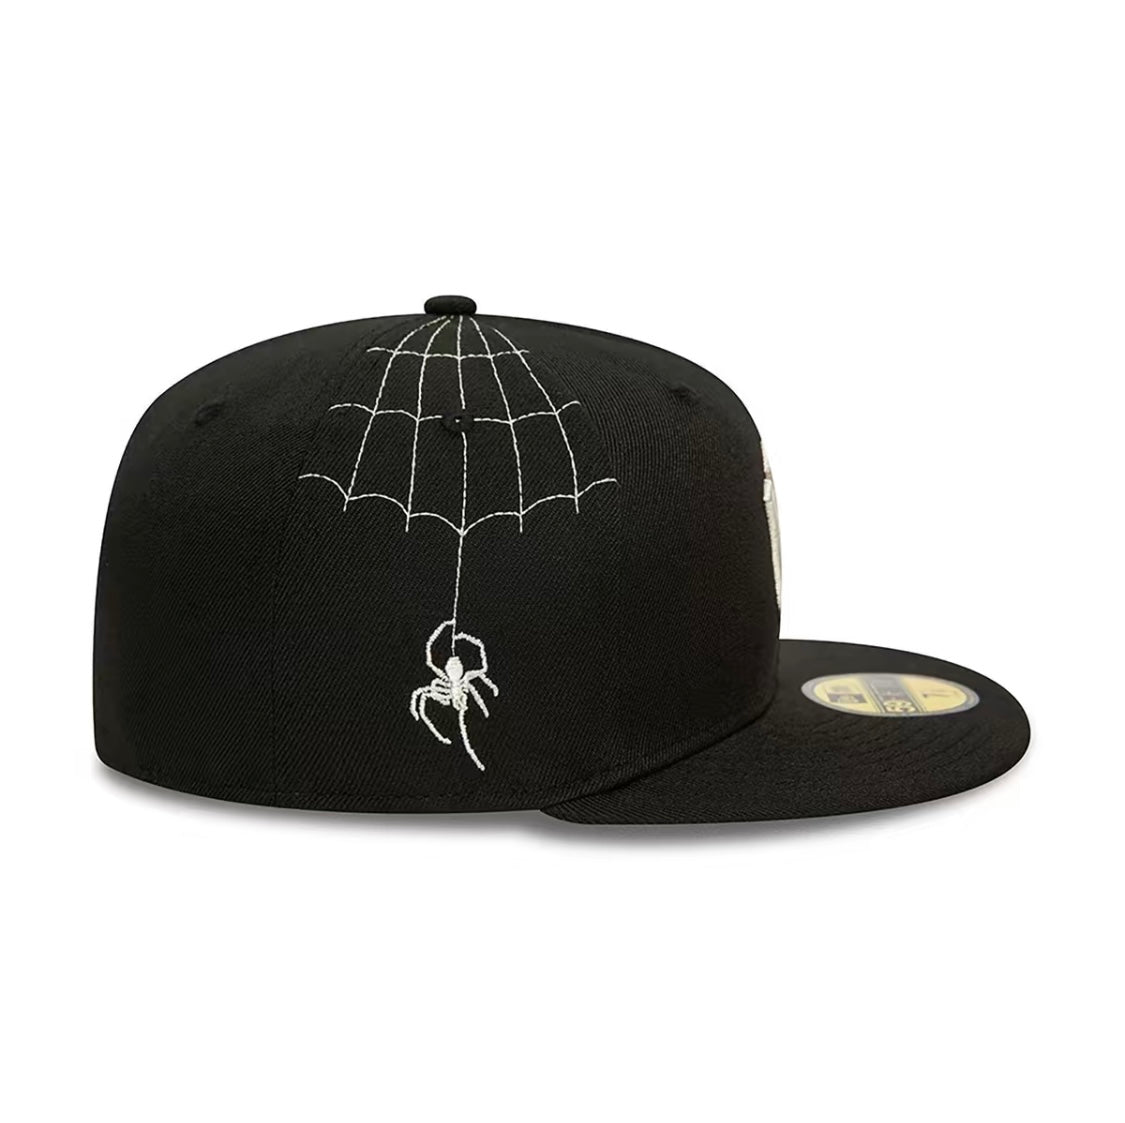 Nyc spider fitted